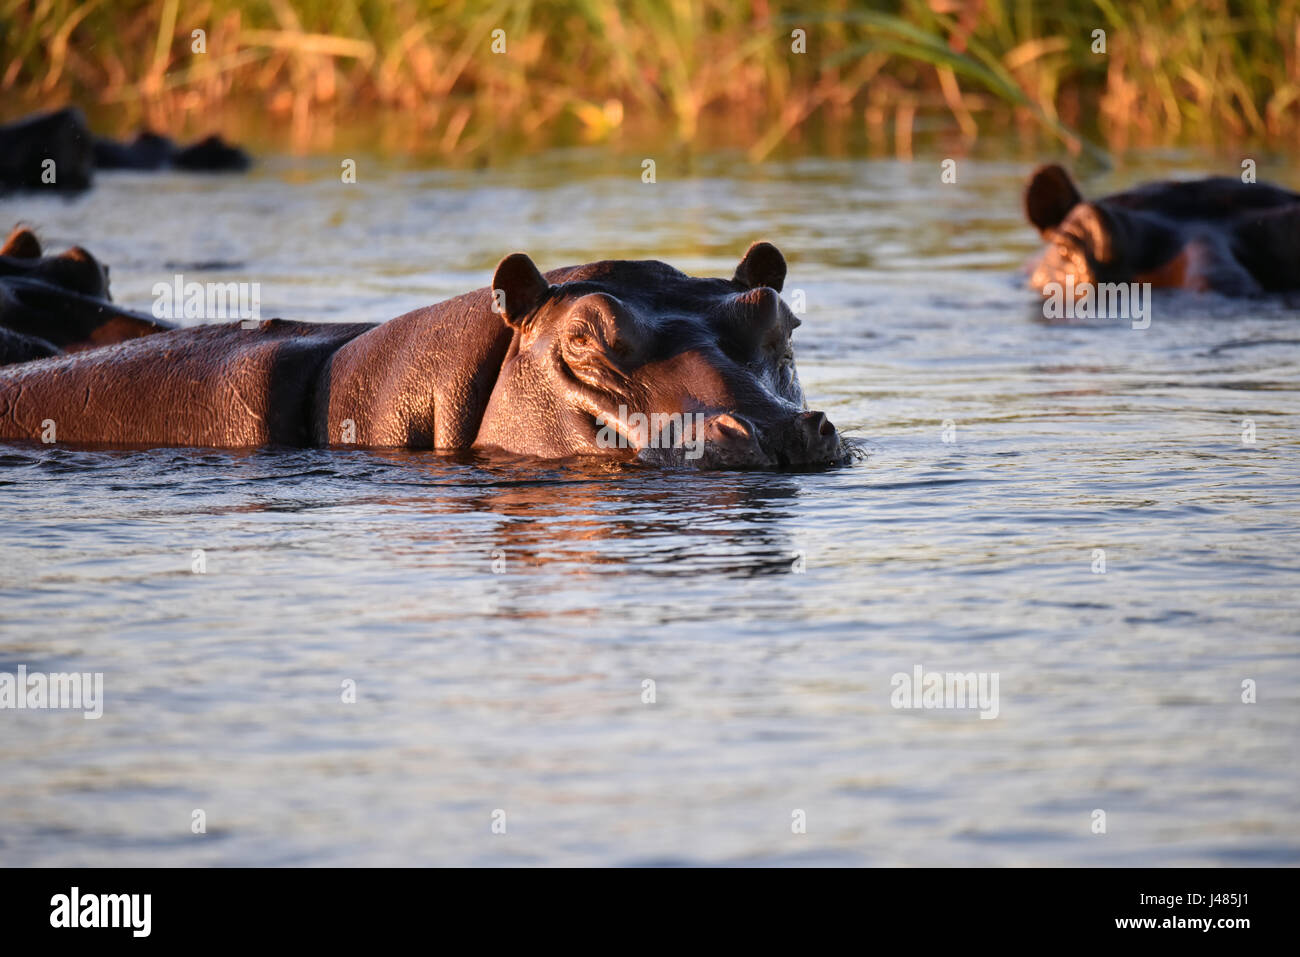 During the day, hippopotami remain mostly submerged underwater, just raising the upper part of their nose, eyes and ears above the water, like in this photo. Taken 02.04.2017 on the Okavango River. Hippos reach a nose to tail length of up to around 5 metres and can weigh up  to 4.5 tons. With a total number of 150,000 animals, this genus is counted among endangered species. Despite their portly appearance, the animals can run quickly on land. They are sometimes known to be very aggressive: they kill more people in Africa than any other species. Photo: Matthias Toedt dpa-Zentralbild/ZB | usage  Stock Photo